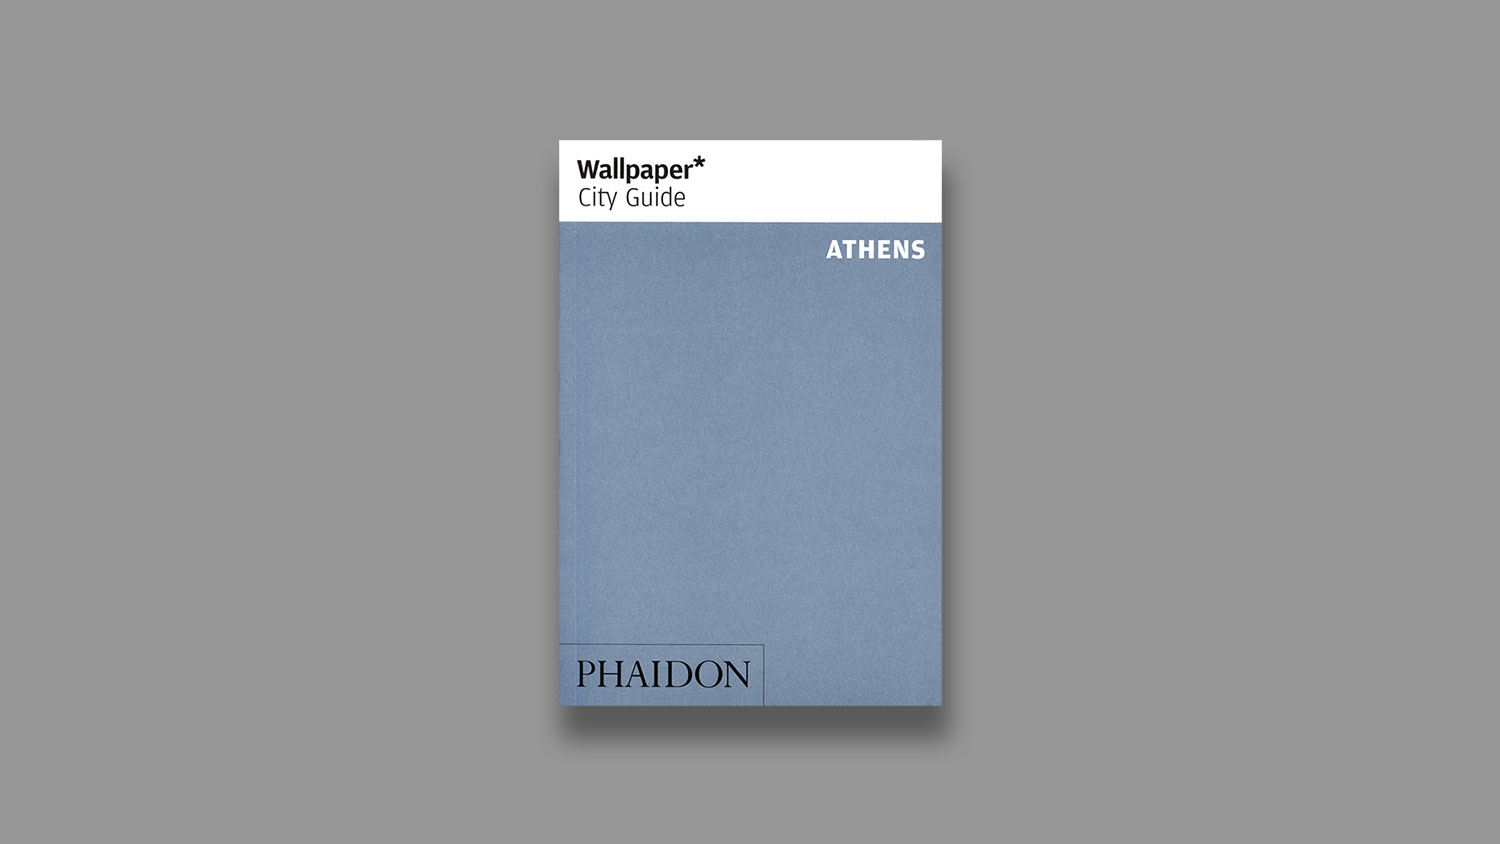 Wallpaper city guide Athens 2020